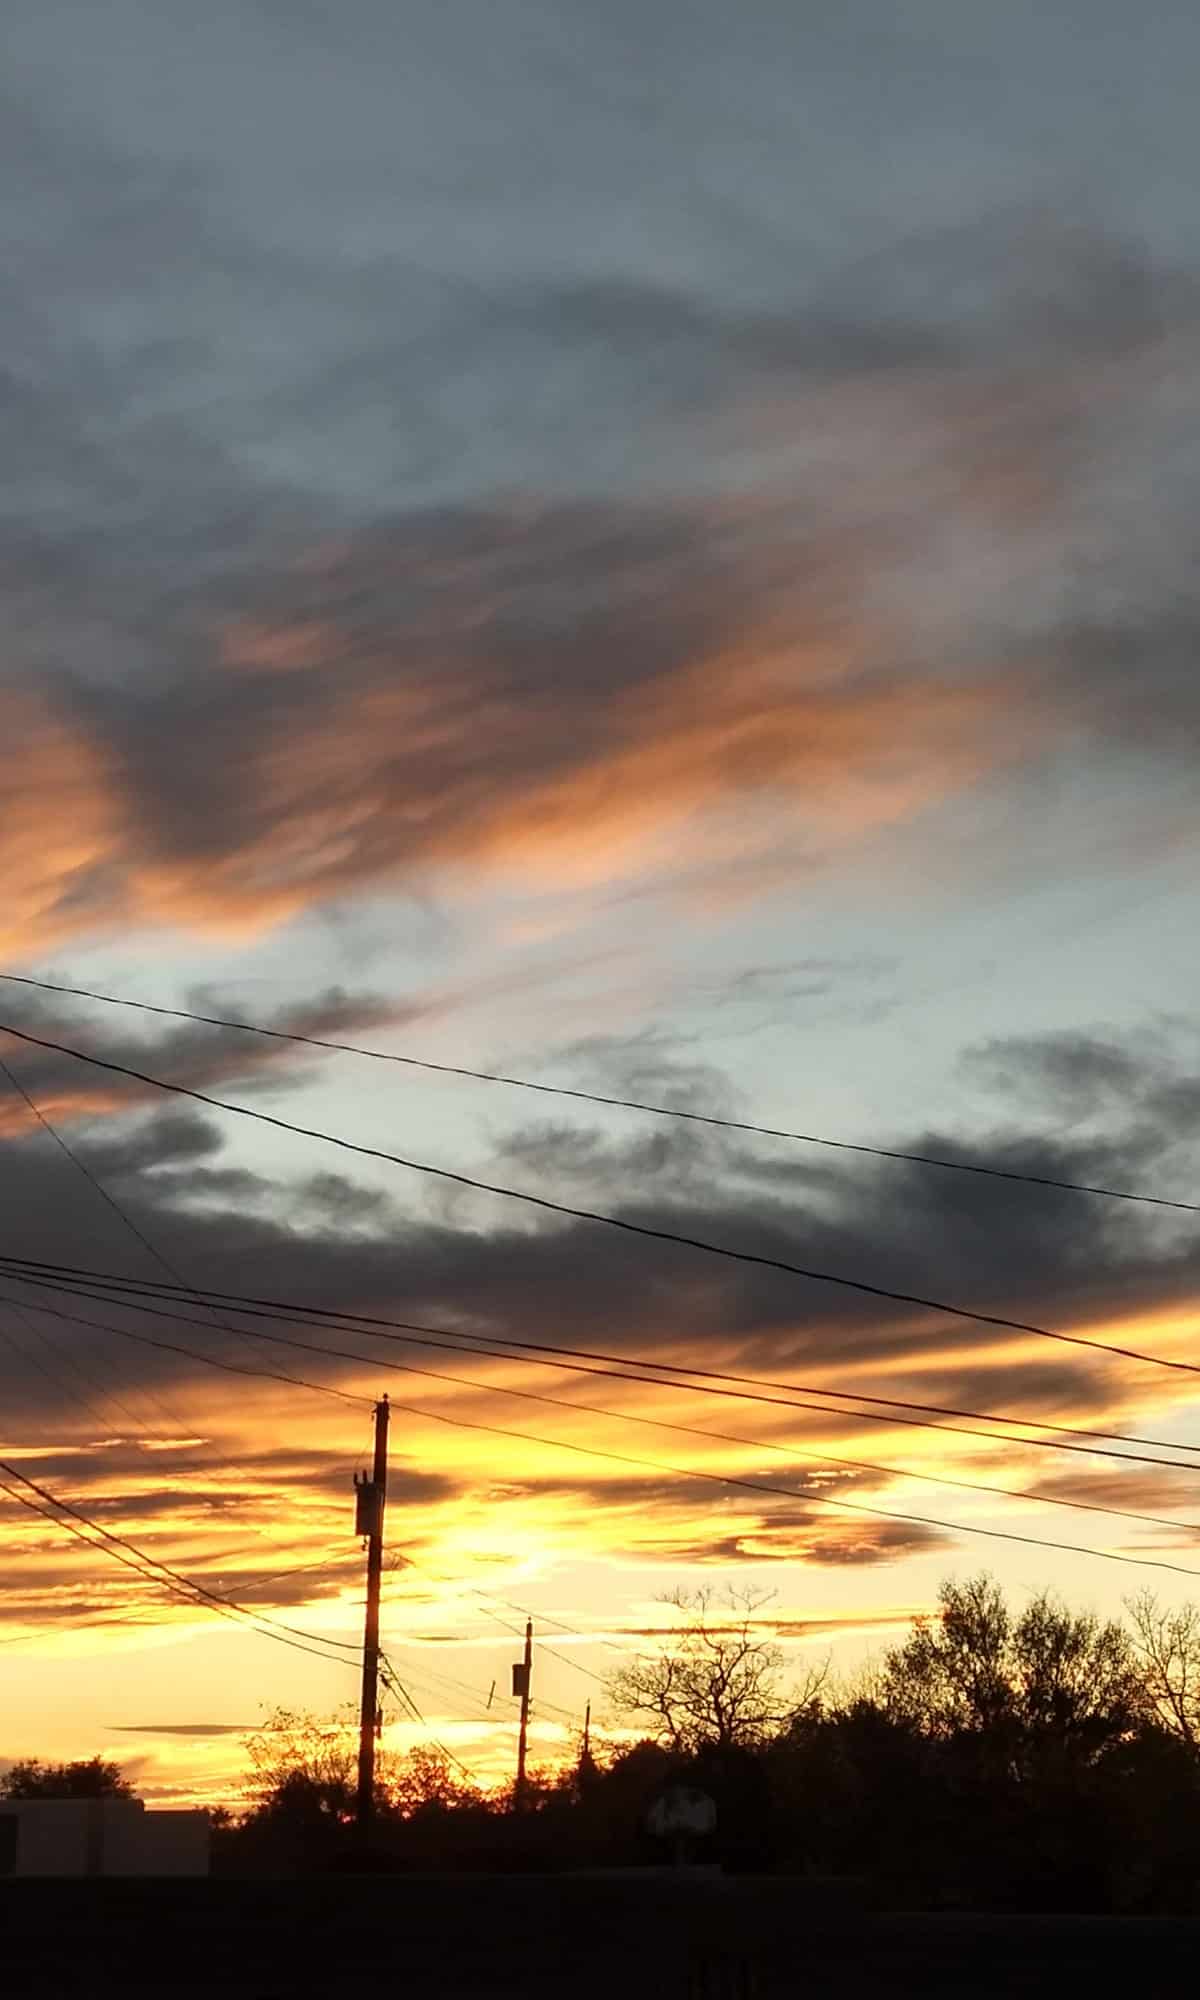 Sunset with power lines in the foreground.